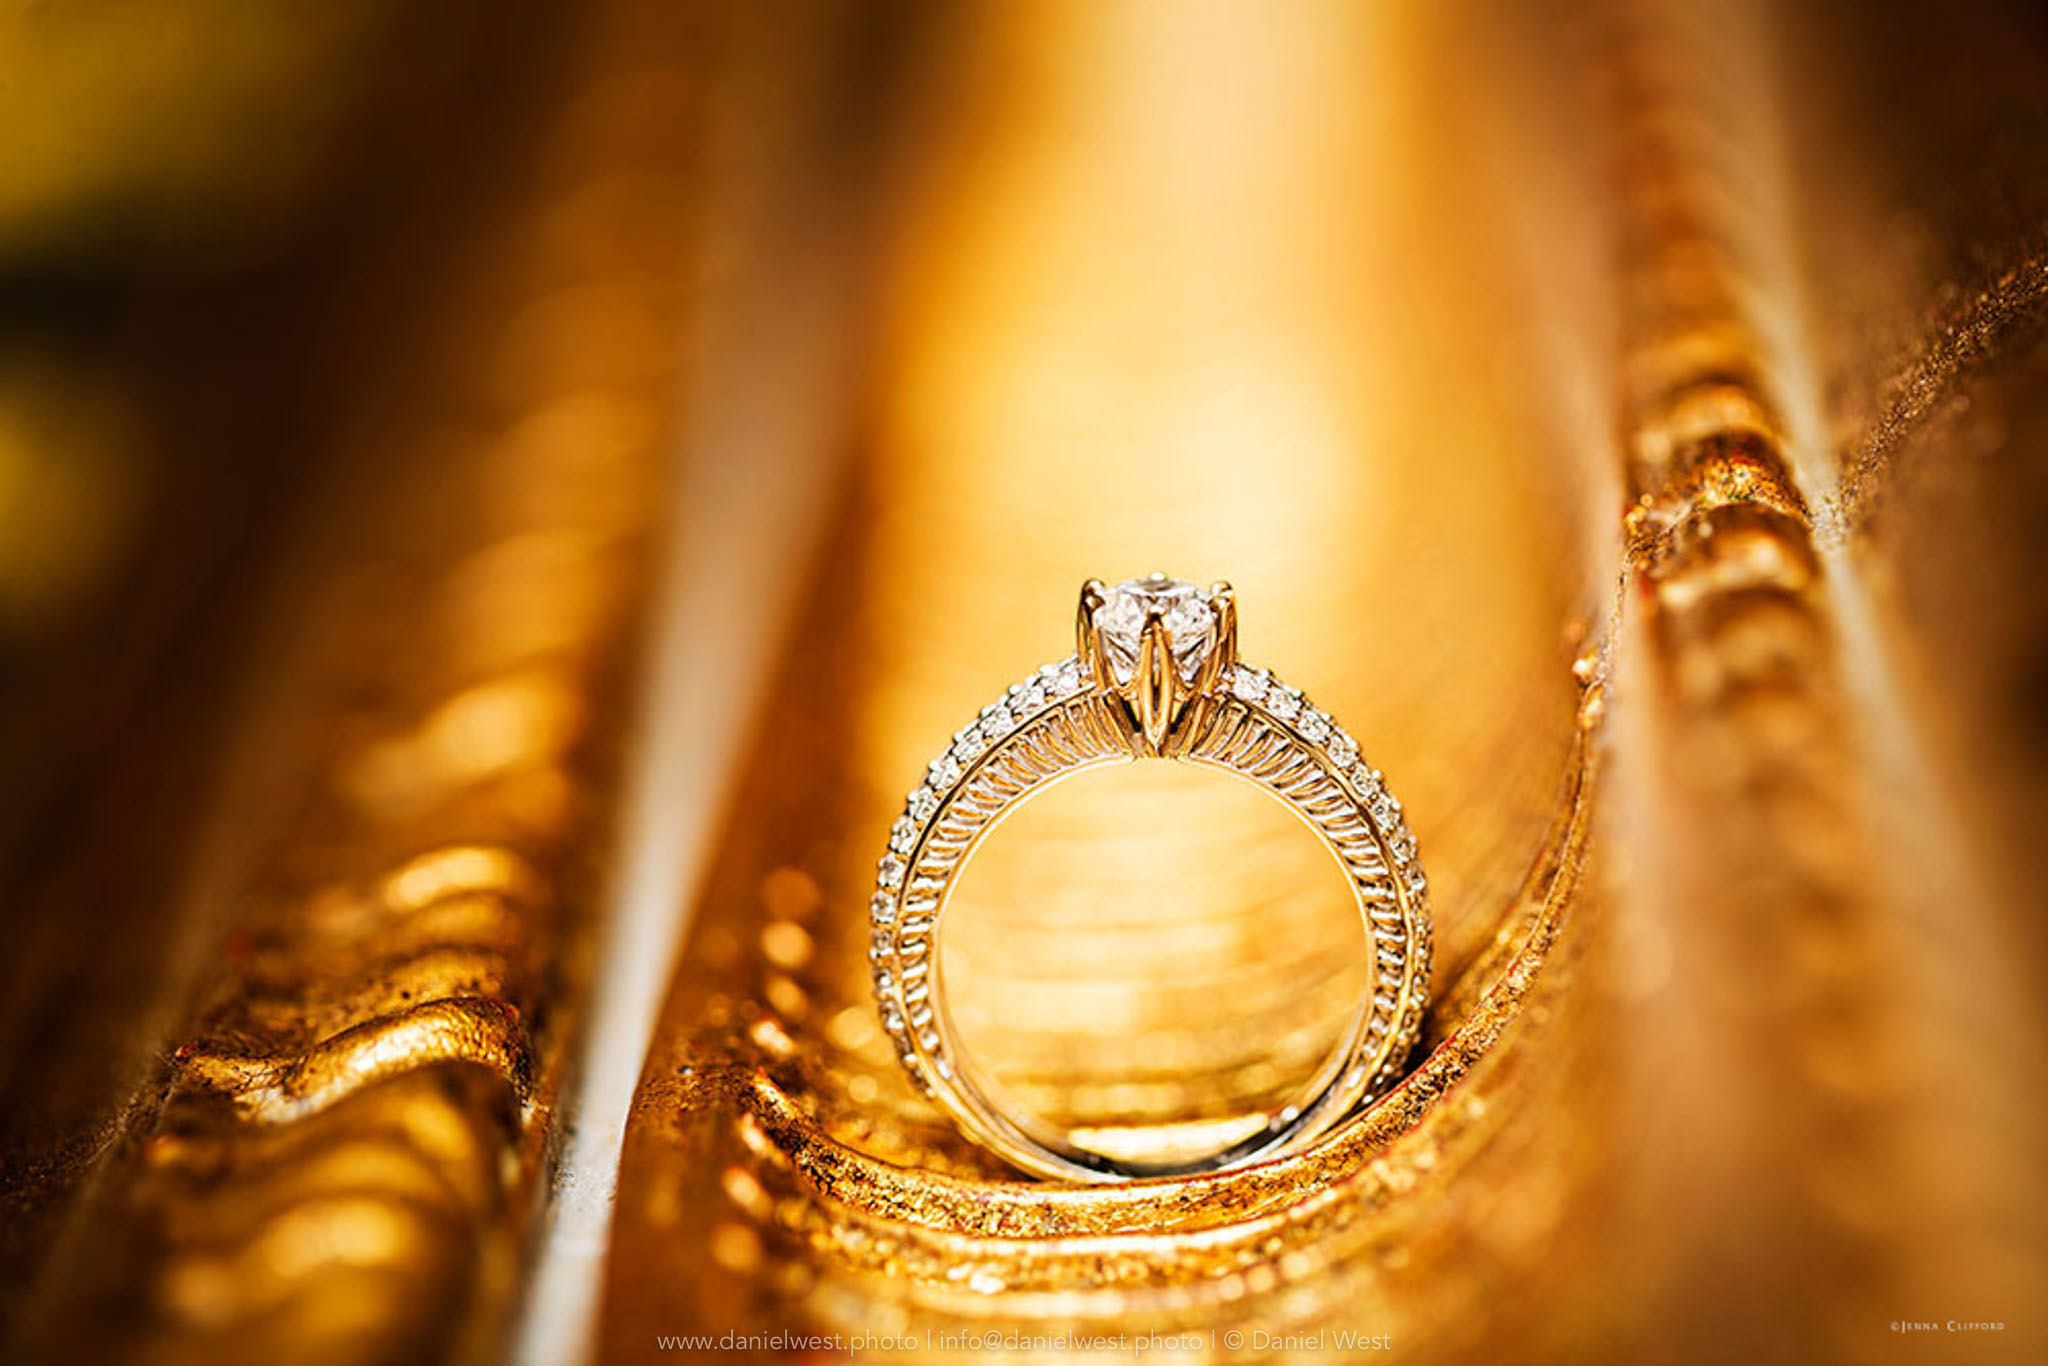 Jewellery - Liquid and Product Photography Specialist